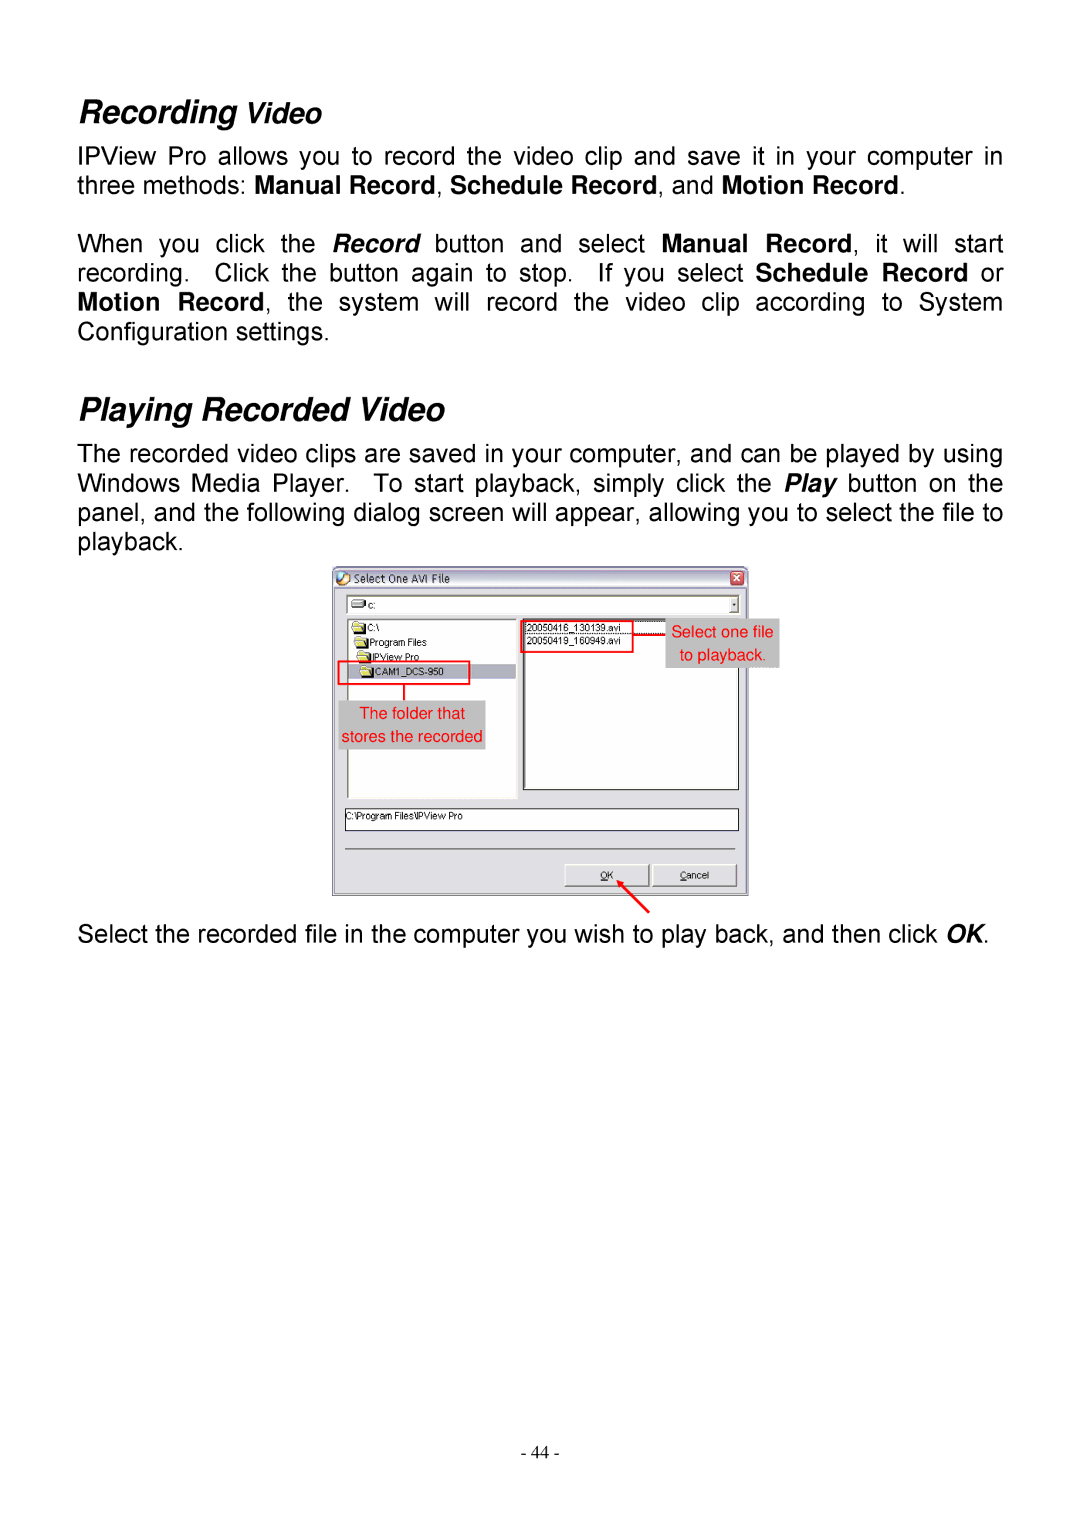 MicroNet Technology SP5530 user manual Recording Video, Playing Recorded Video 